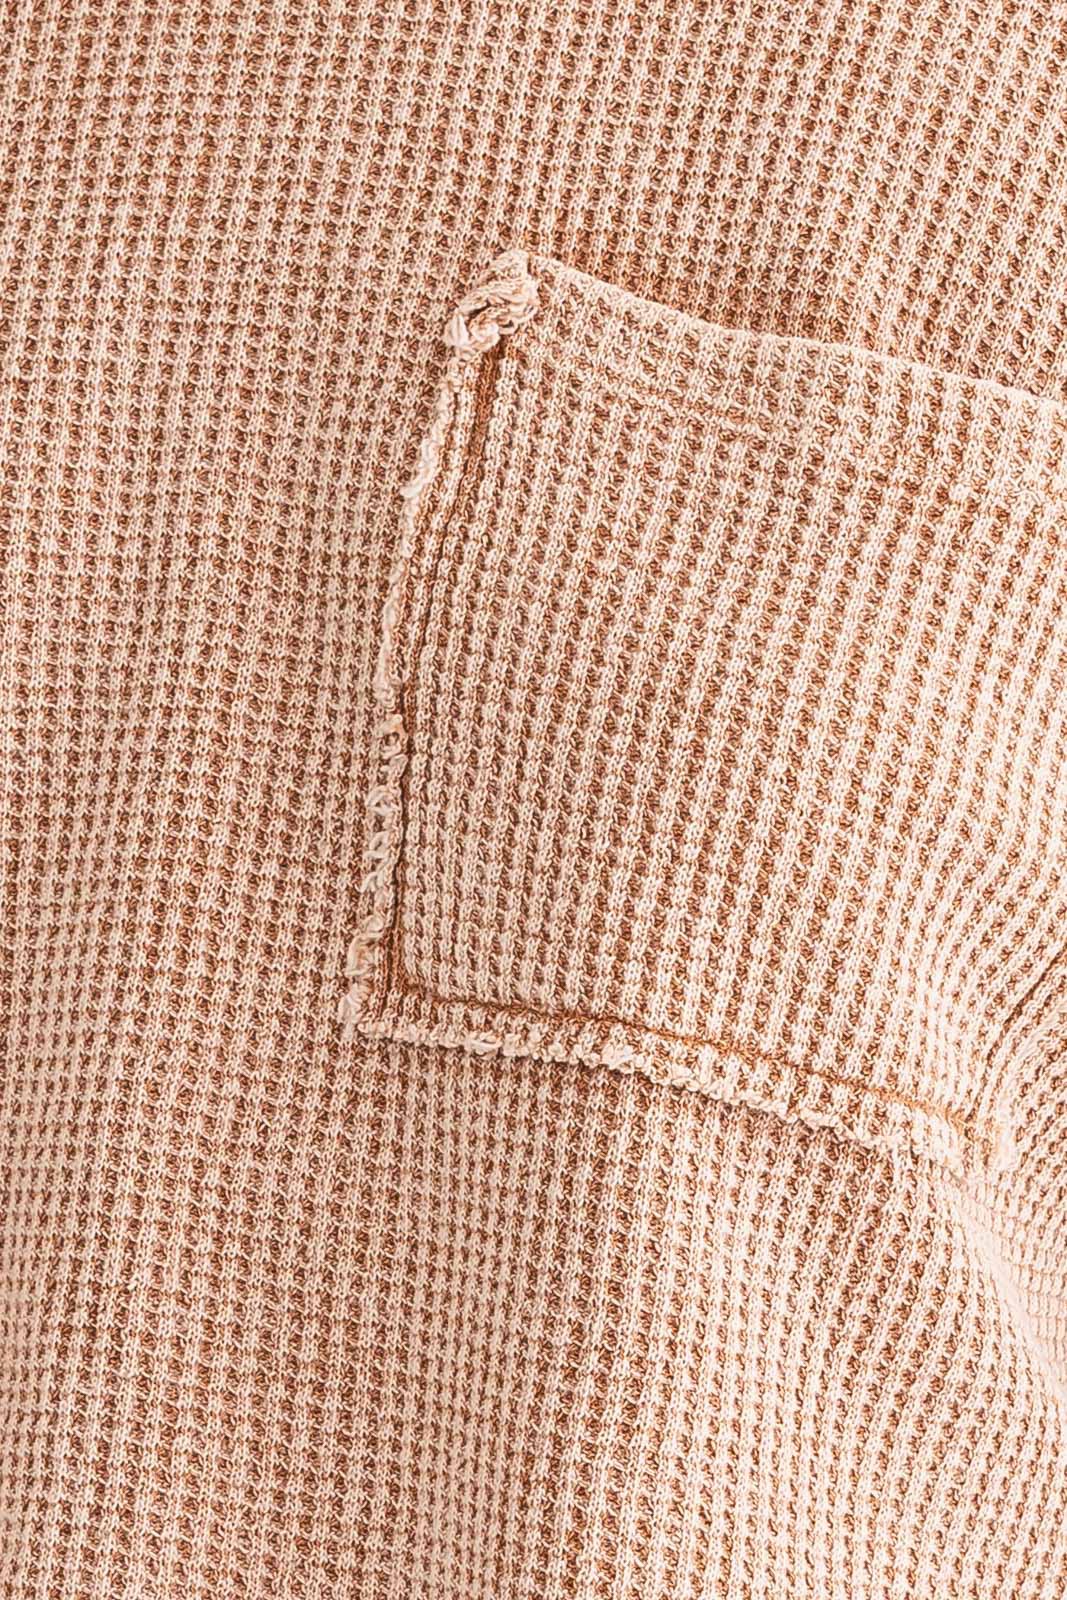 Le Lis | Tan Thermal Knit Top | Sweetest Stitch Women&#39;s Boutique